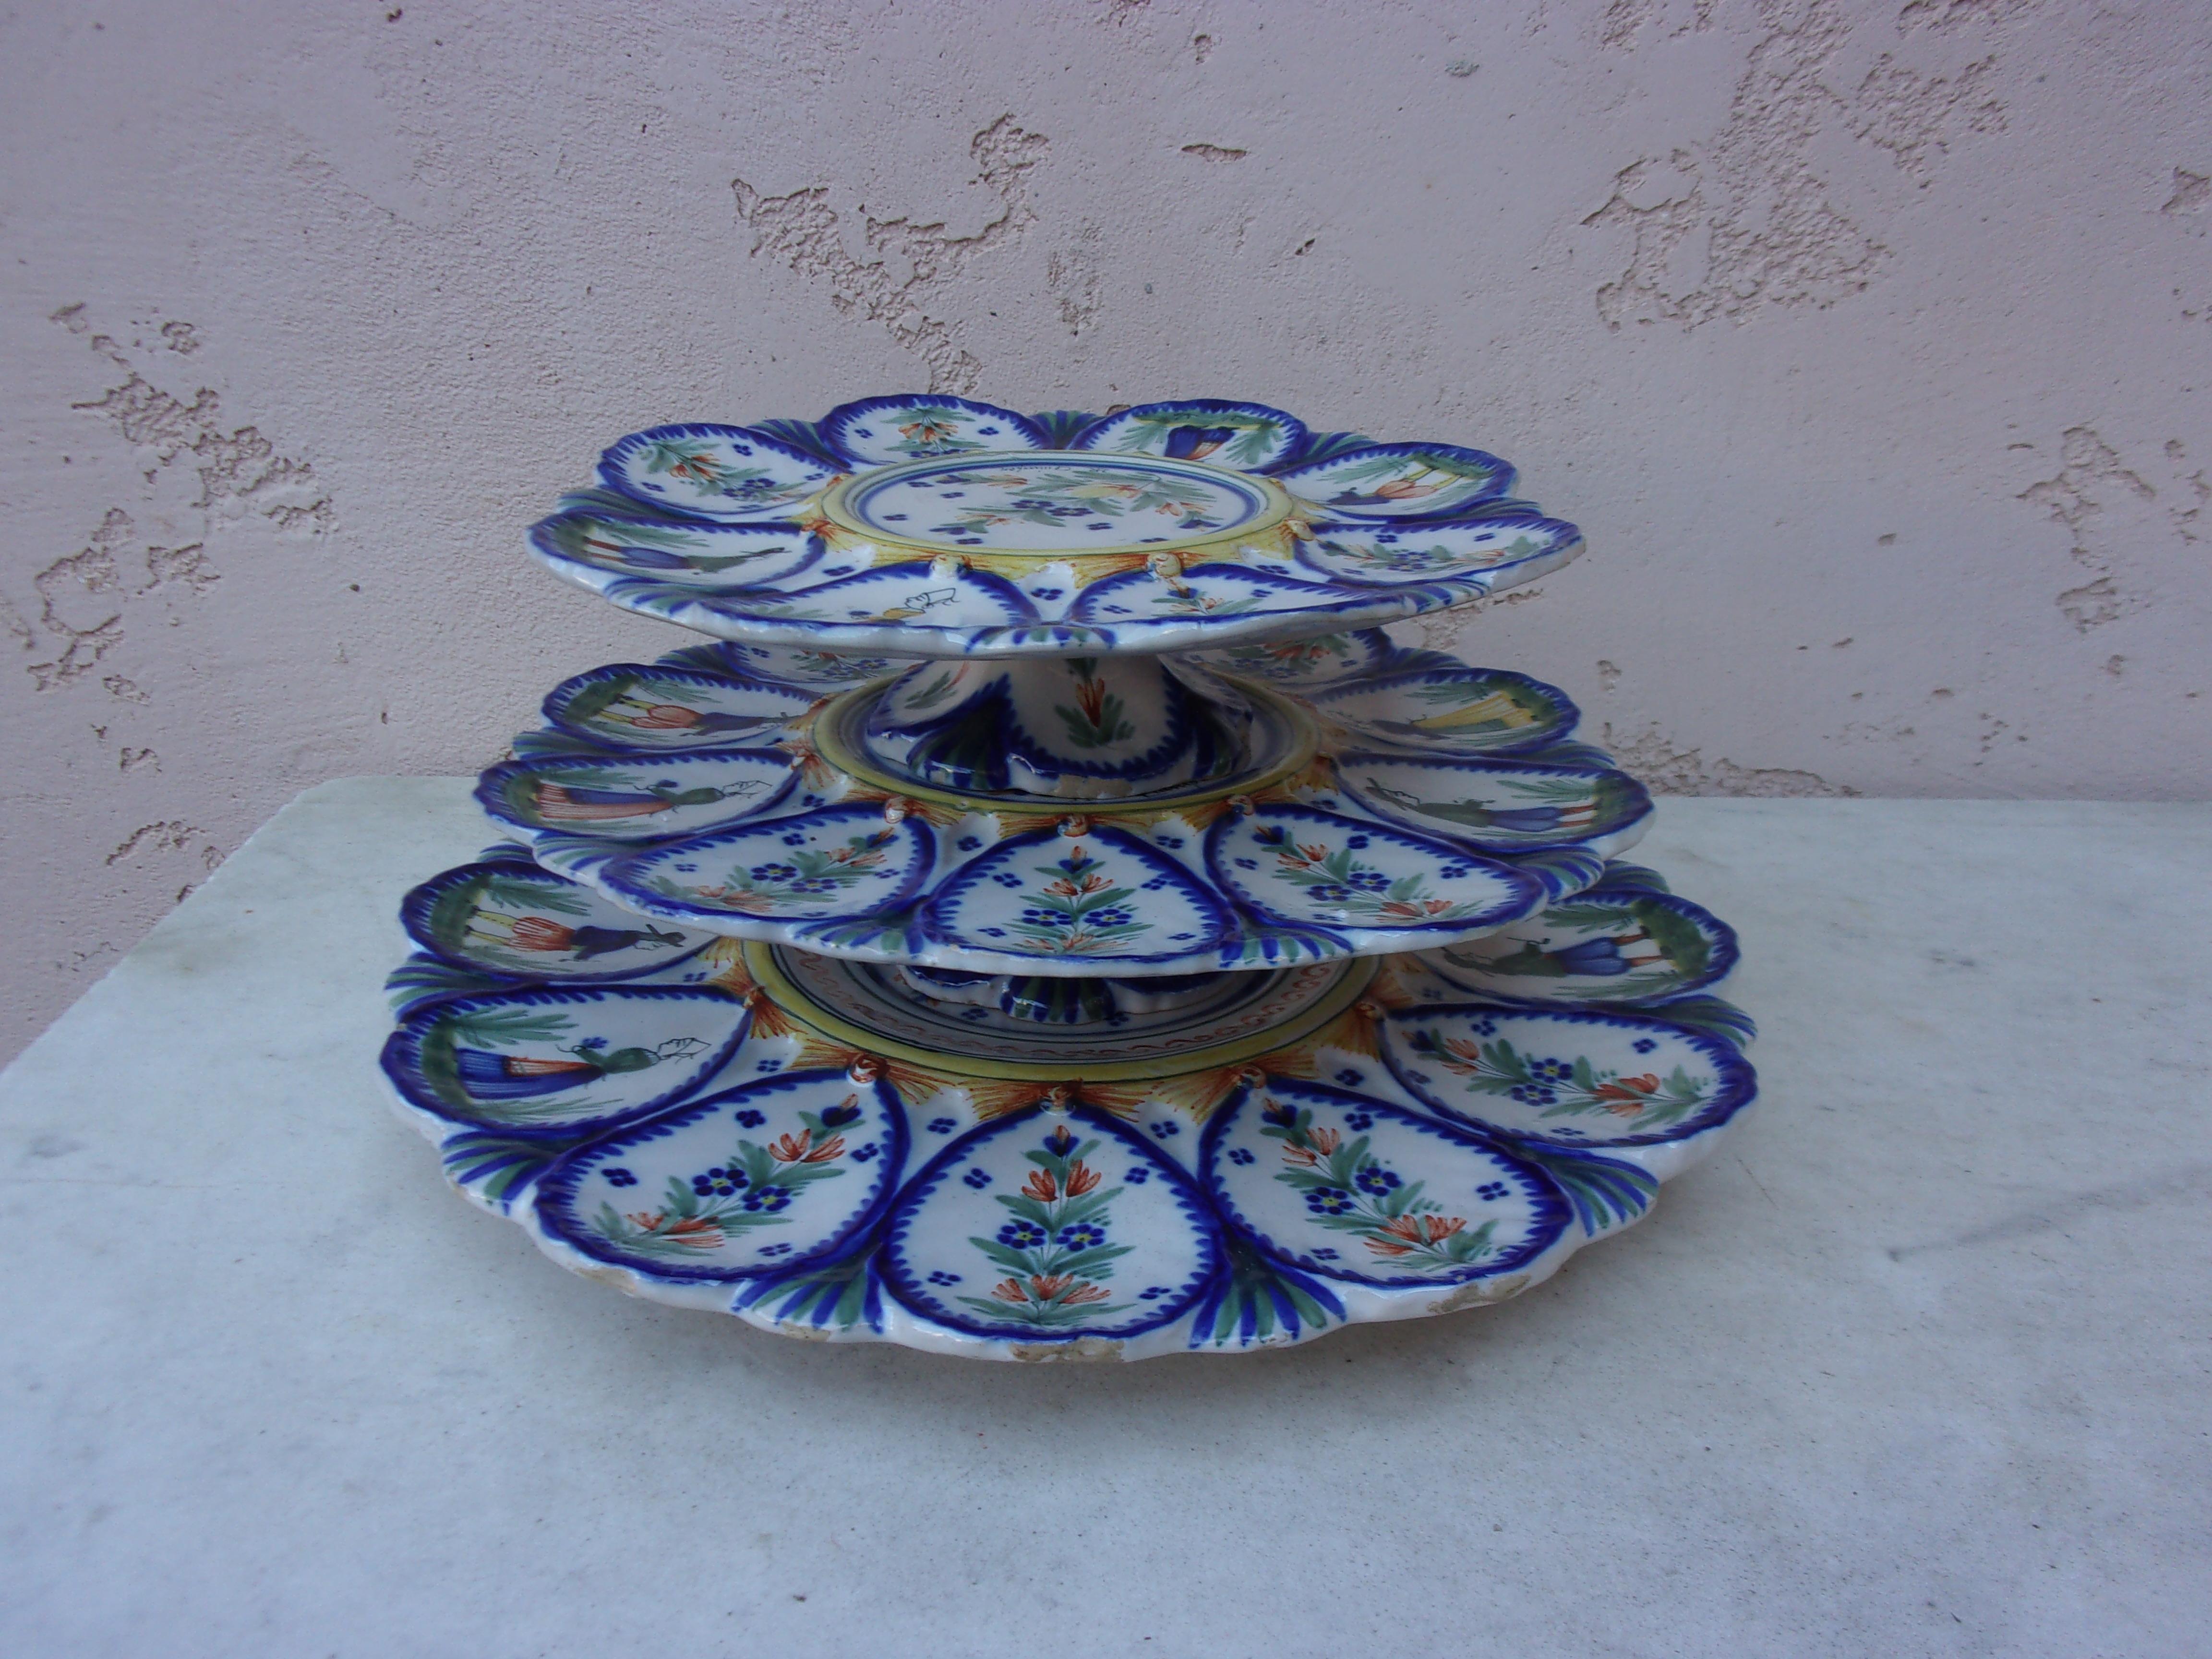 19th Century French Faience Server Oyster signed Henriot Quimper HR.
3 platters servers ( Larger to smaller 13.3